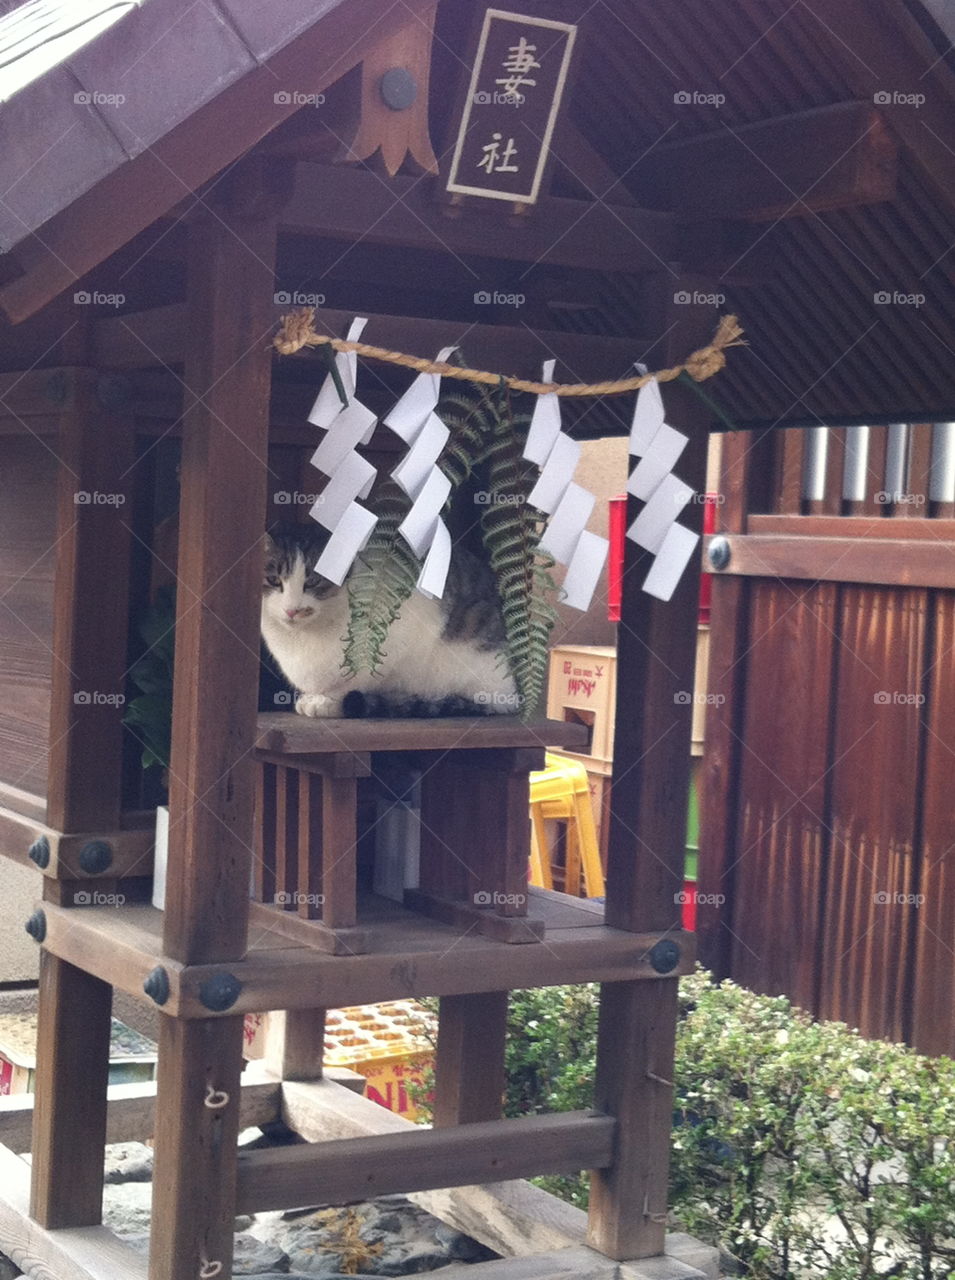 A cat gets comfortable in a small shrine in Japan.